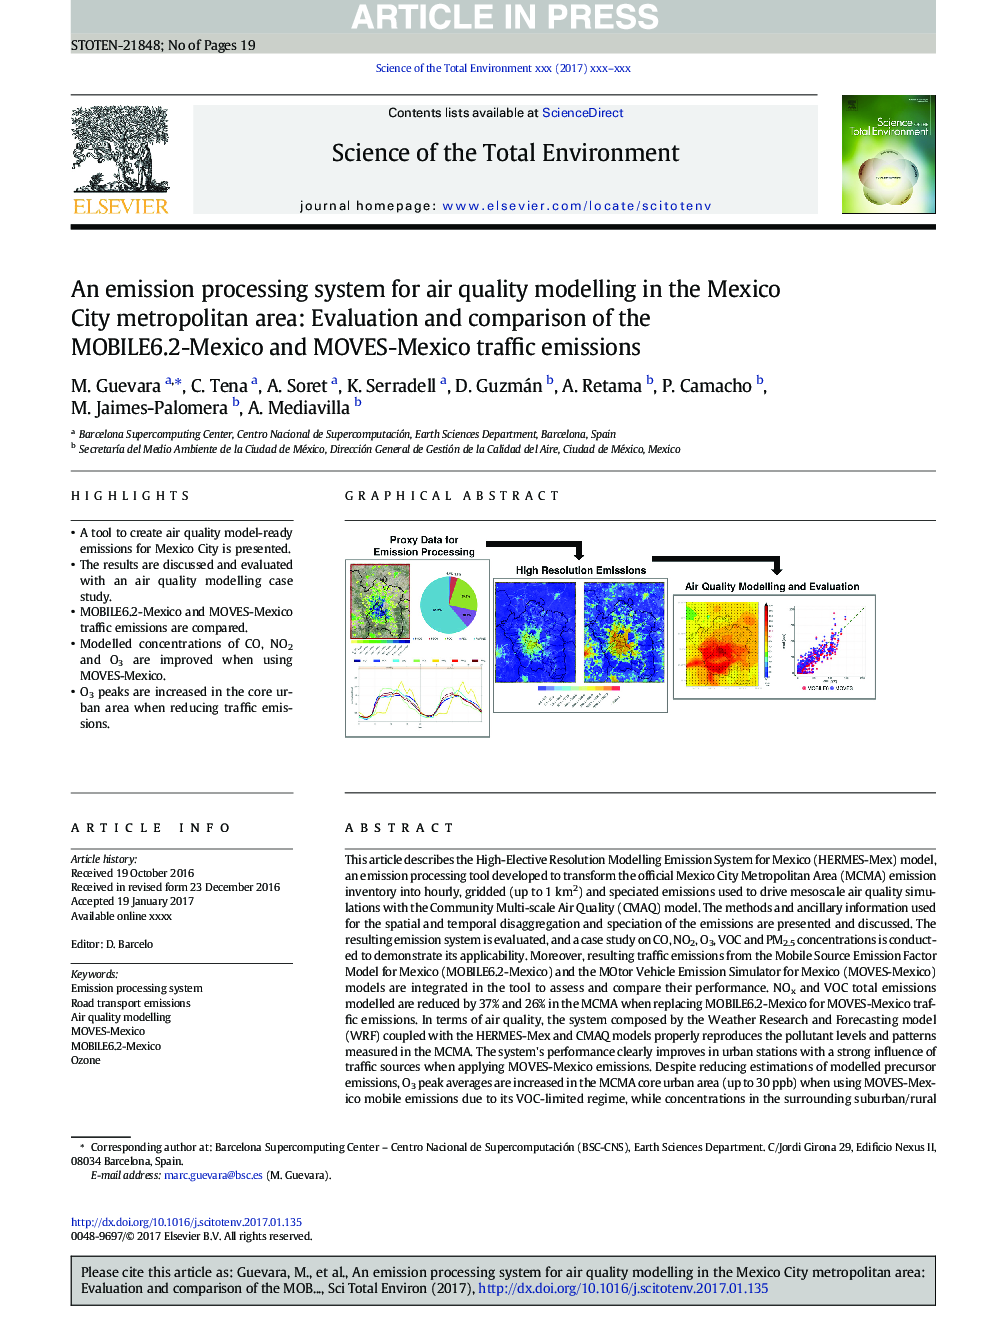 An emission processing system for air quality modelling in the Mexico City metropolitan area: Evaluation and comparison of the MOBILE6.2-Mexico and MOVES-Mexico traffic emissions